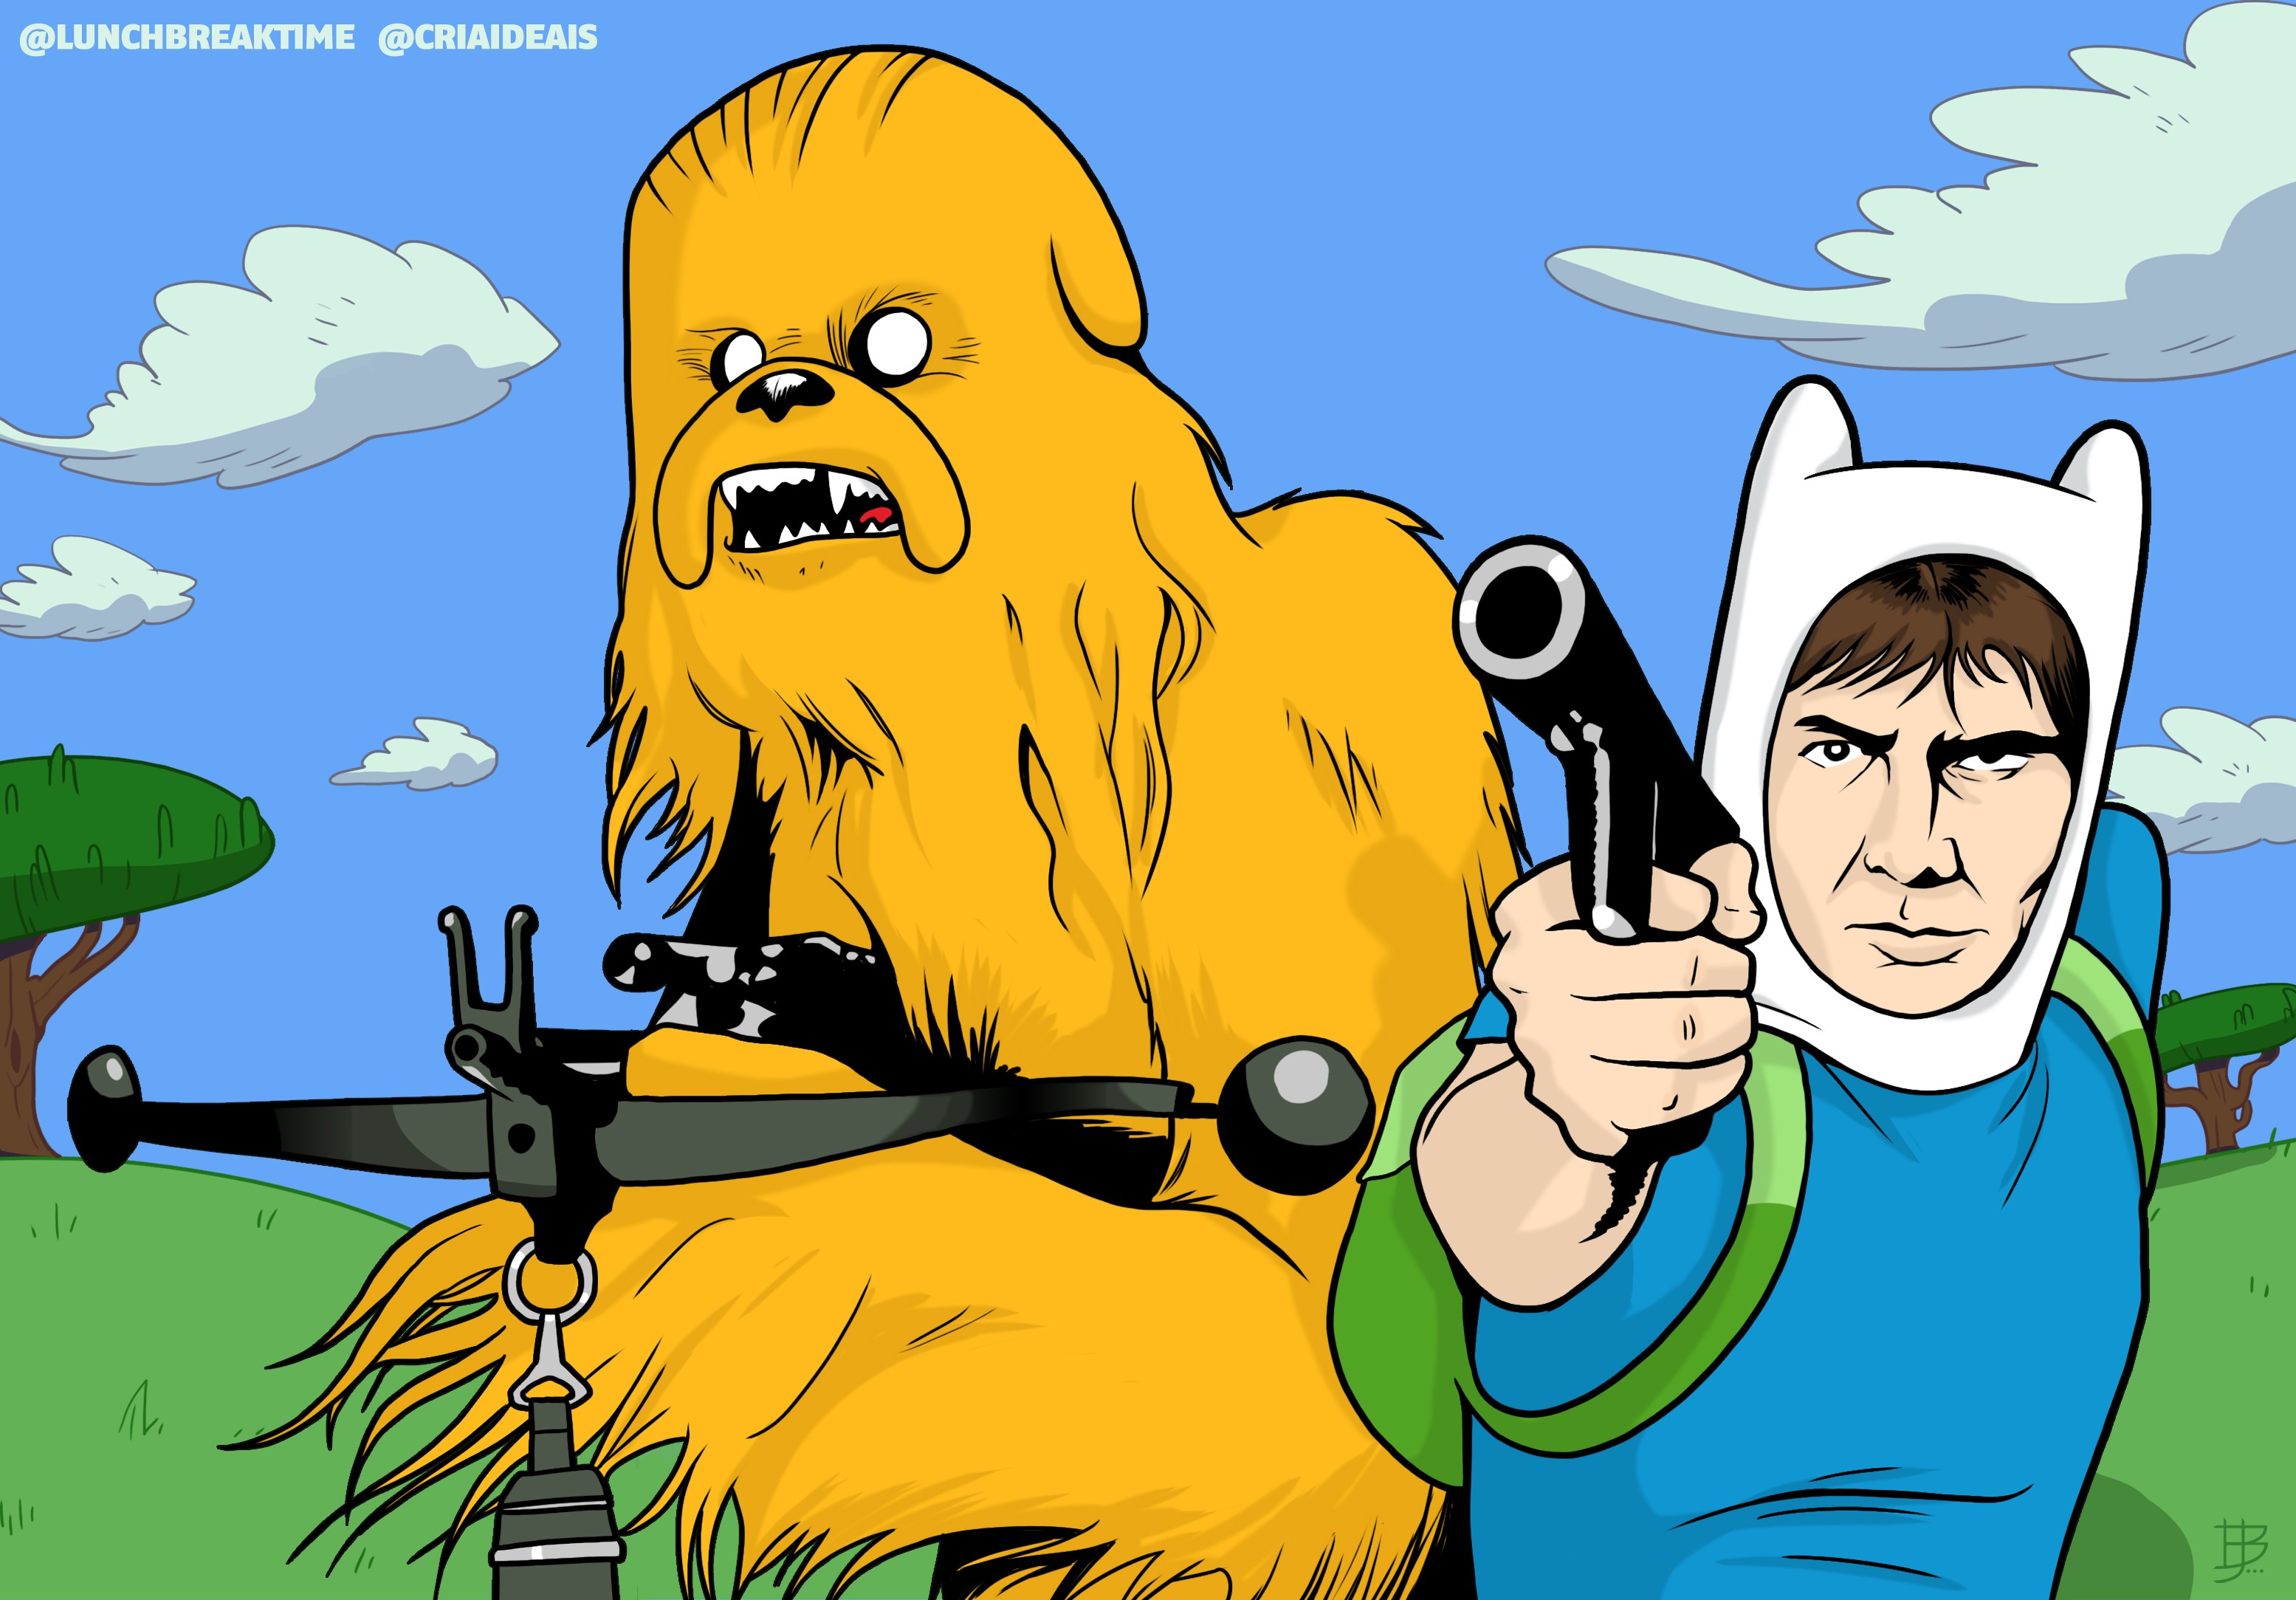 General 3110x2167 Adventure Time Star Wars Han Solo Harrison Ford Chewbacca face men Star Wars Humor science fiction Wookiees TV series digital art crossover watermarked gun boys with guns clouds Star Wars Heroes sky aiming grass trees